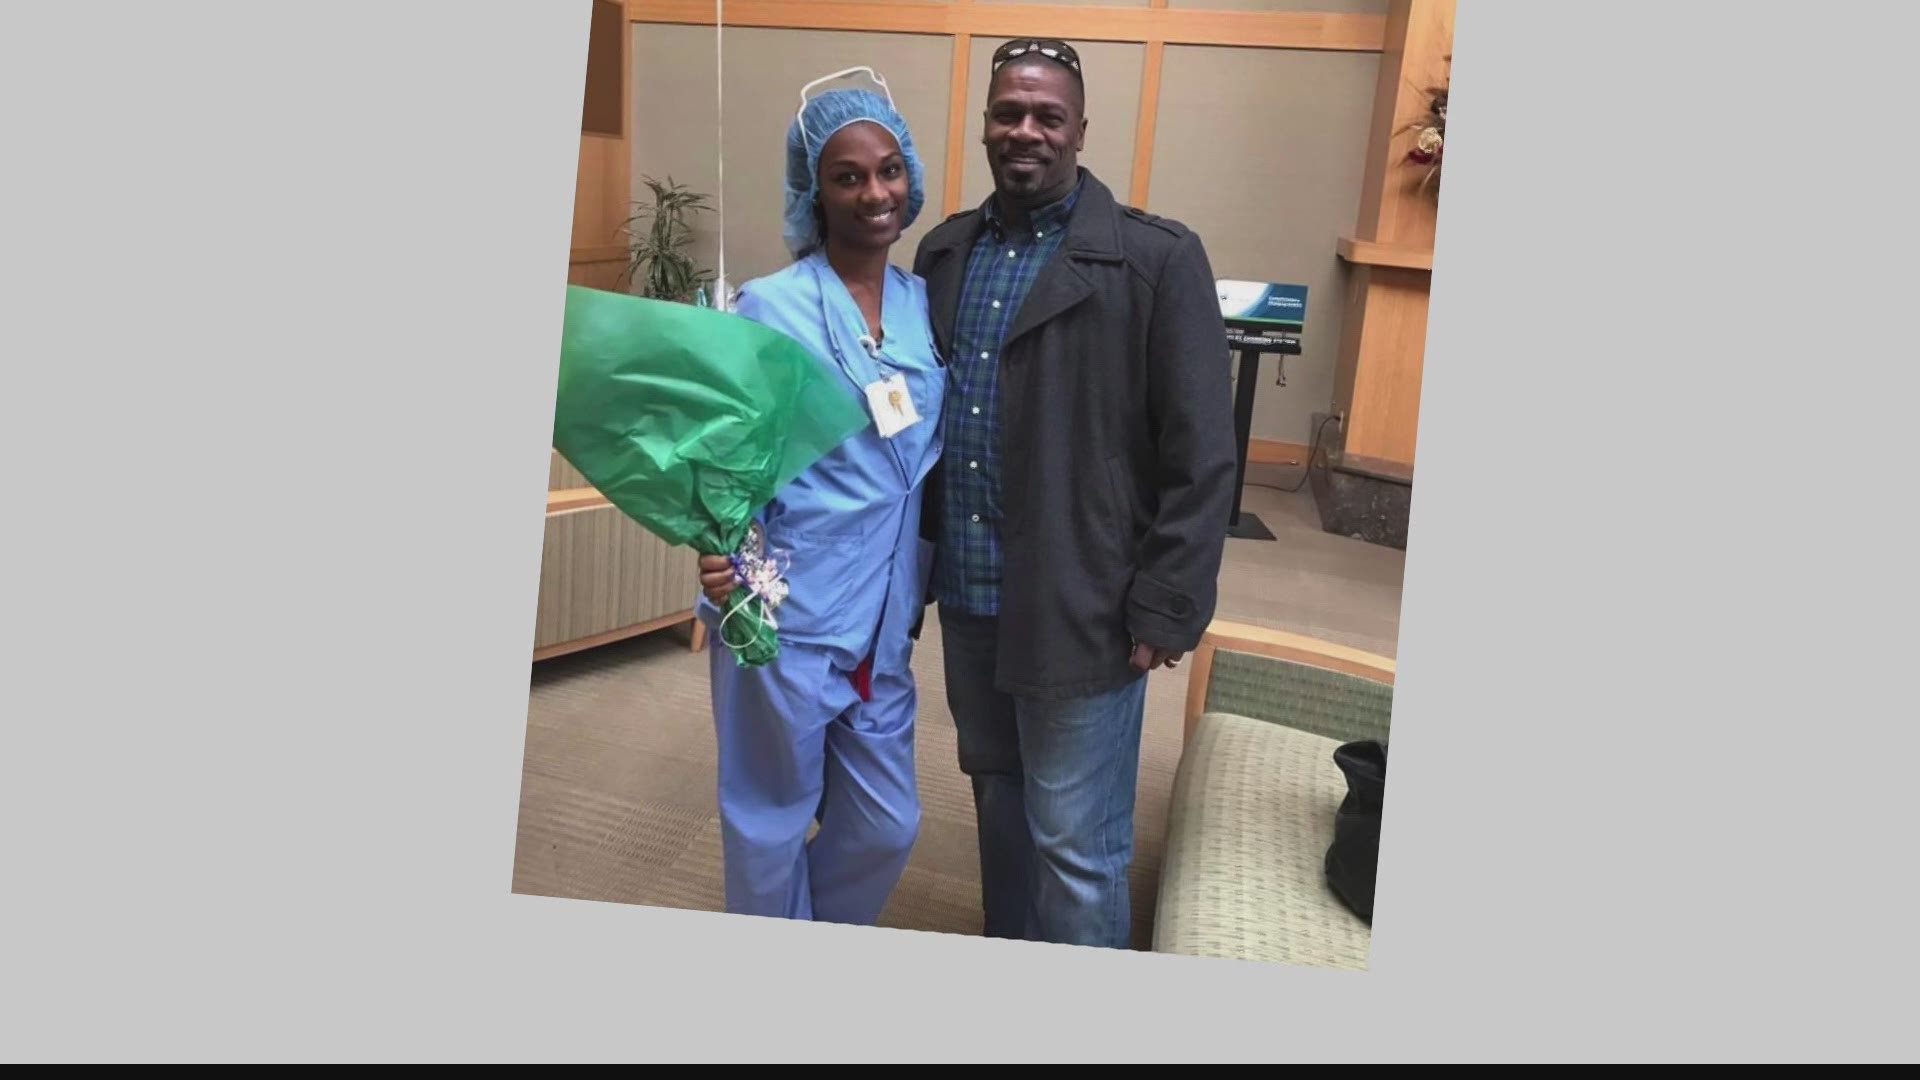 An Indianapolis nurse is credited with saving her father's life after he went into cardiac arrest.